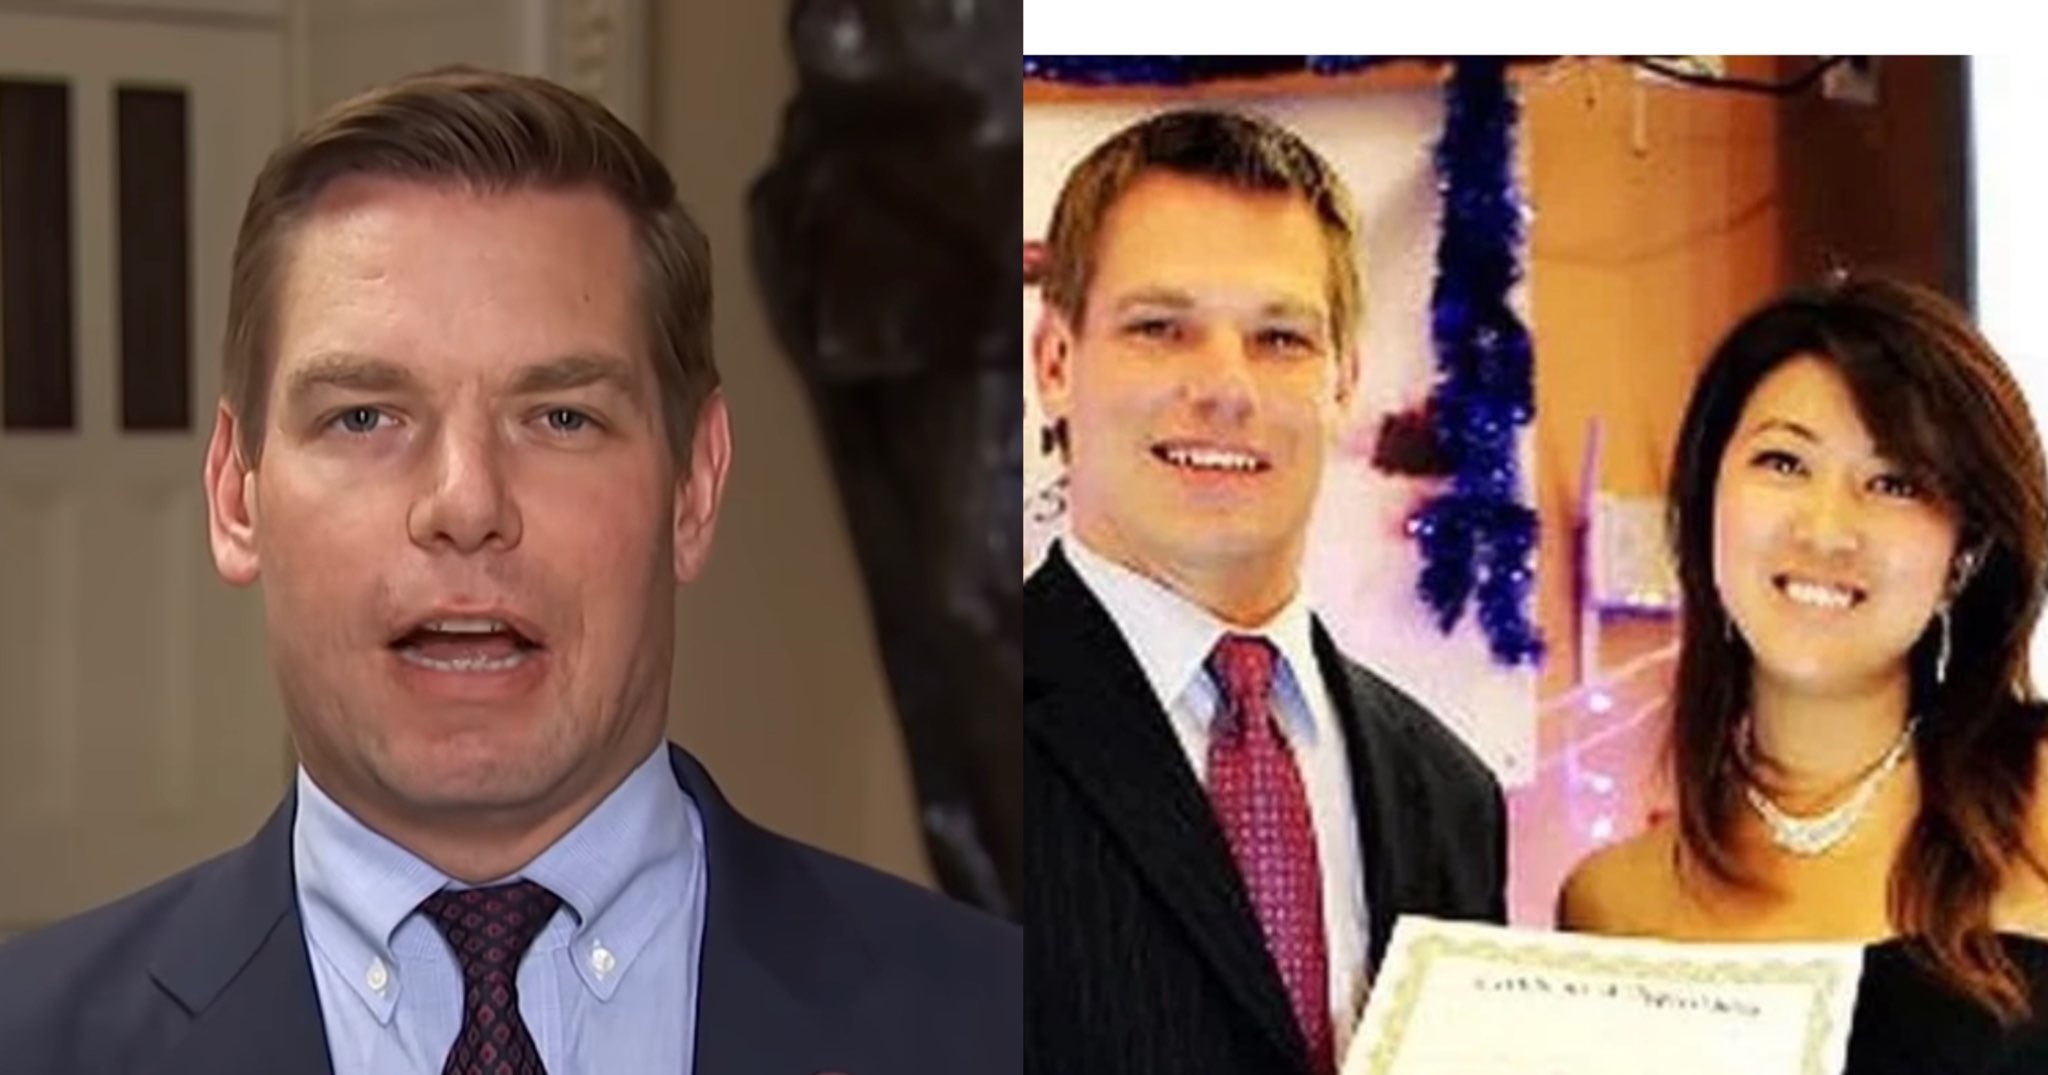 eric-swalwell-was-involved-with-chinese-operative-who-slept-with-two